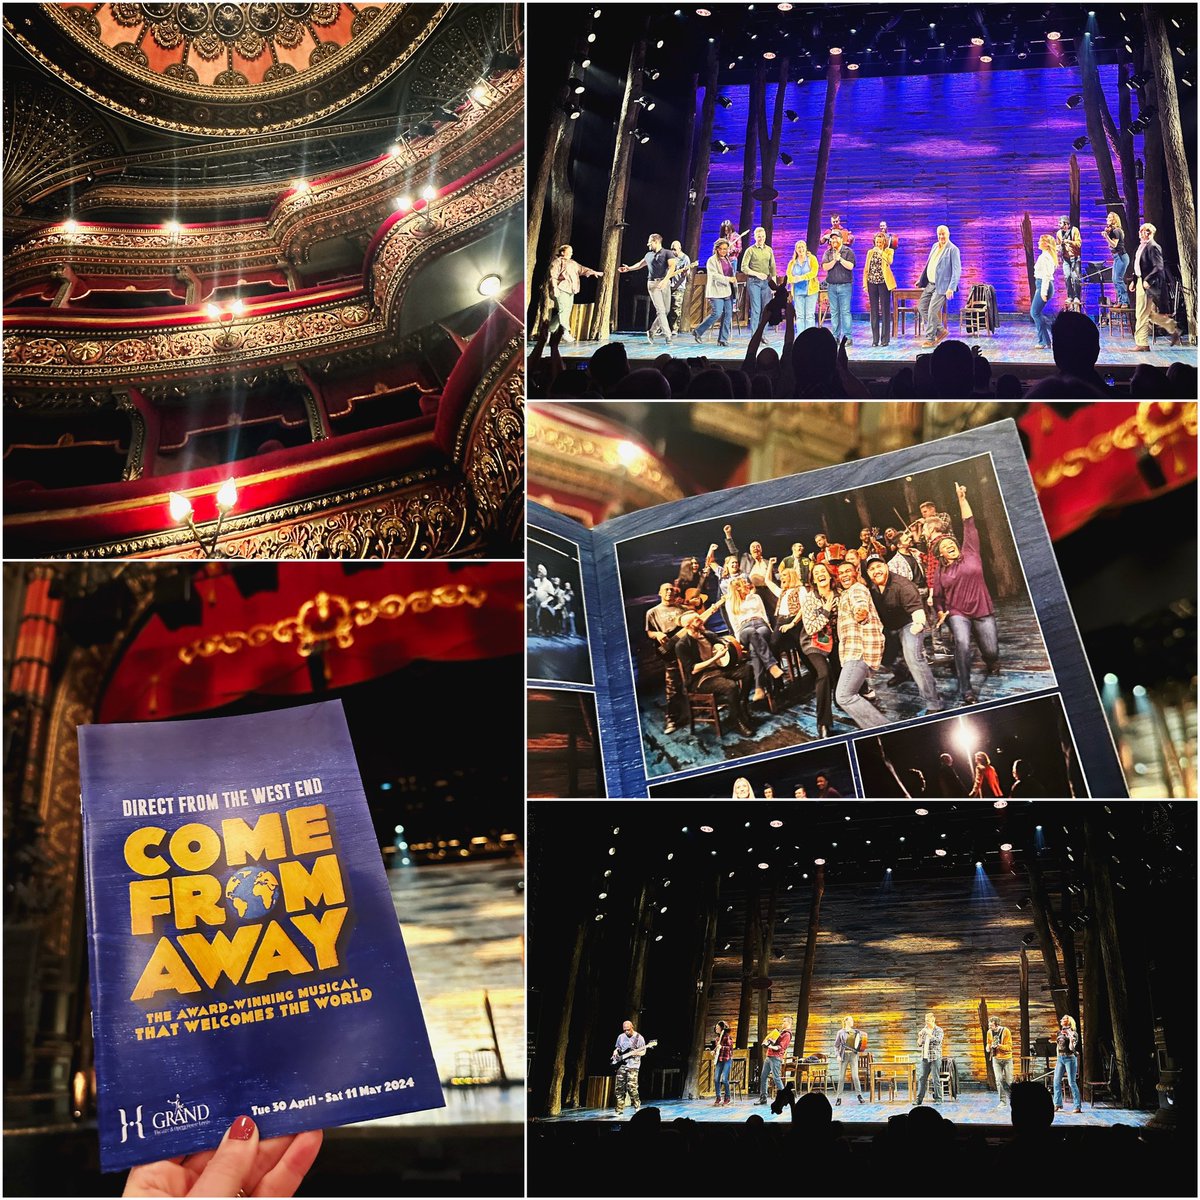 I was excited about seeing @ComeFromAwayUK again. 100 minutes of pure joy in my favourite theatre. What a night! I can’t recommend it highly enough. You’ve got until Sat 11 May to see it at @GrandTheatreLS1 before it lands elsewhere. Go go go! @LeedsTheatres